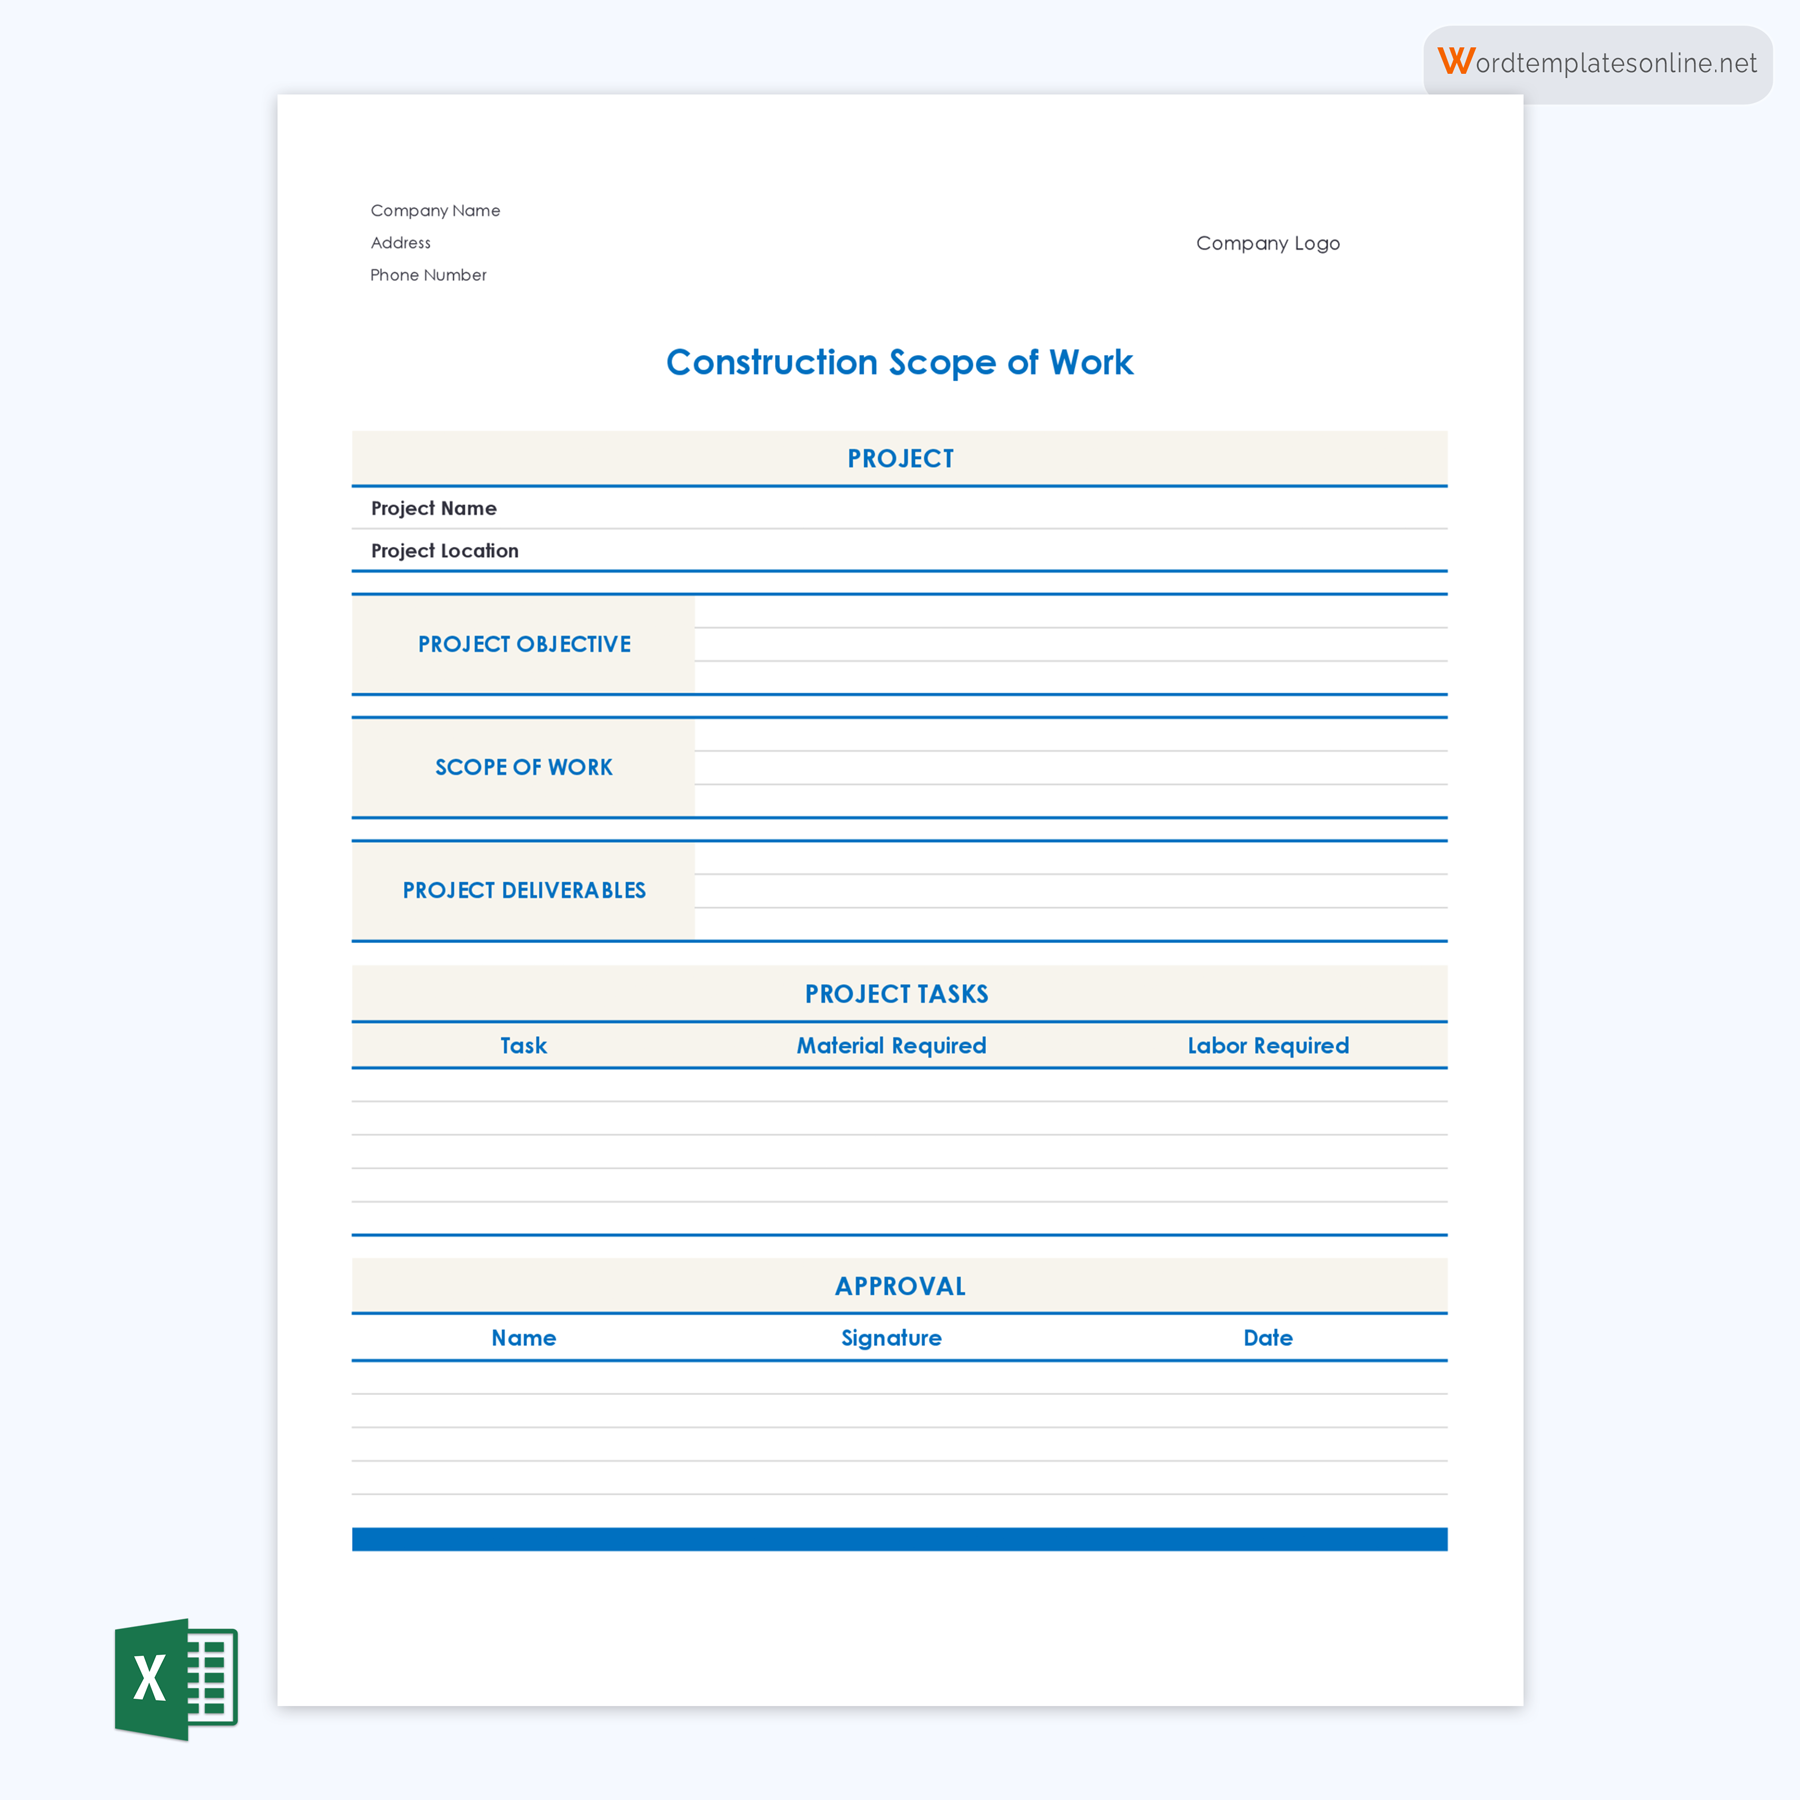 Construction Scope of Work Template - Printable and Editable in Excel